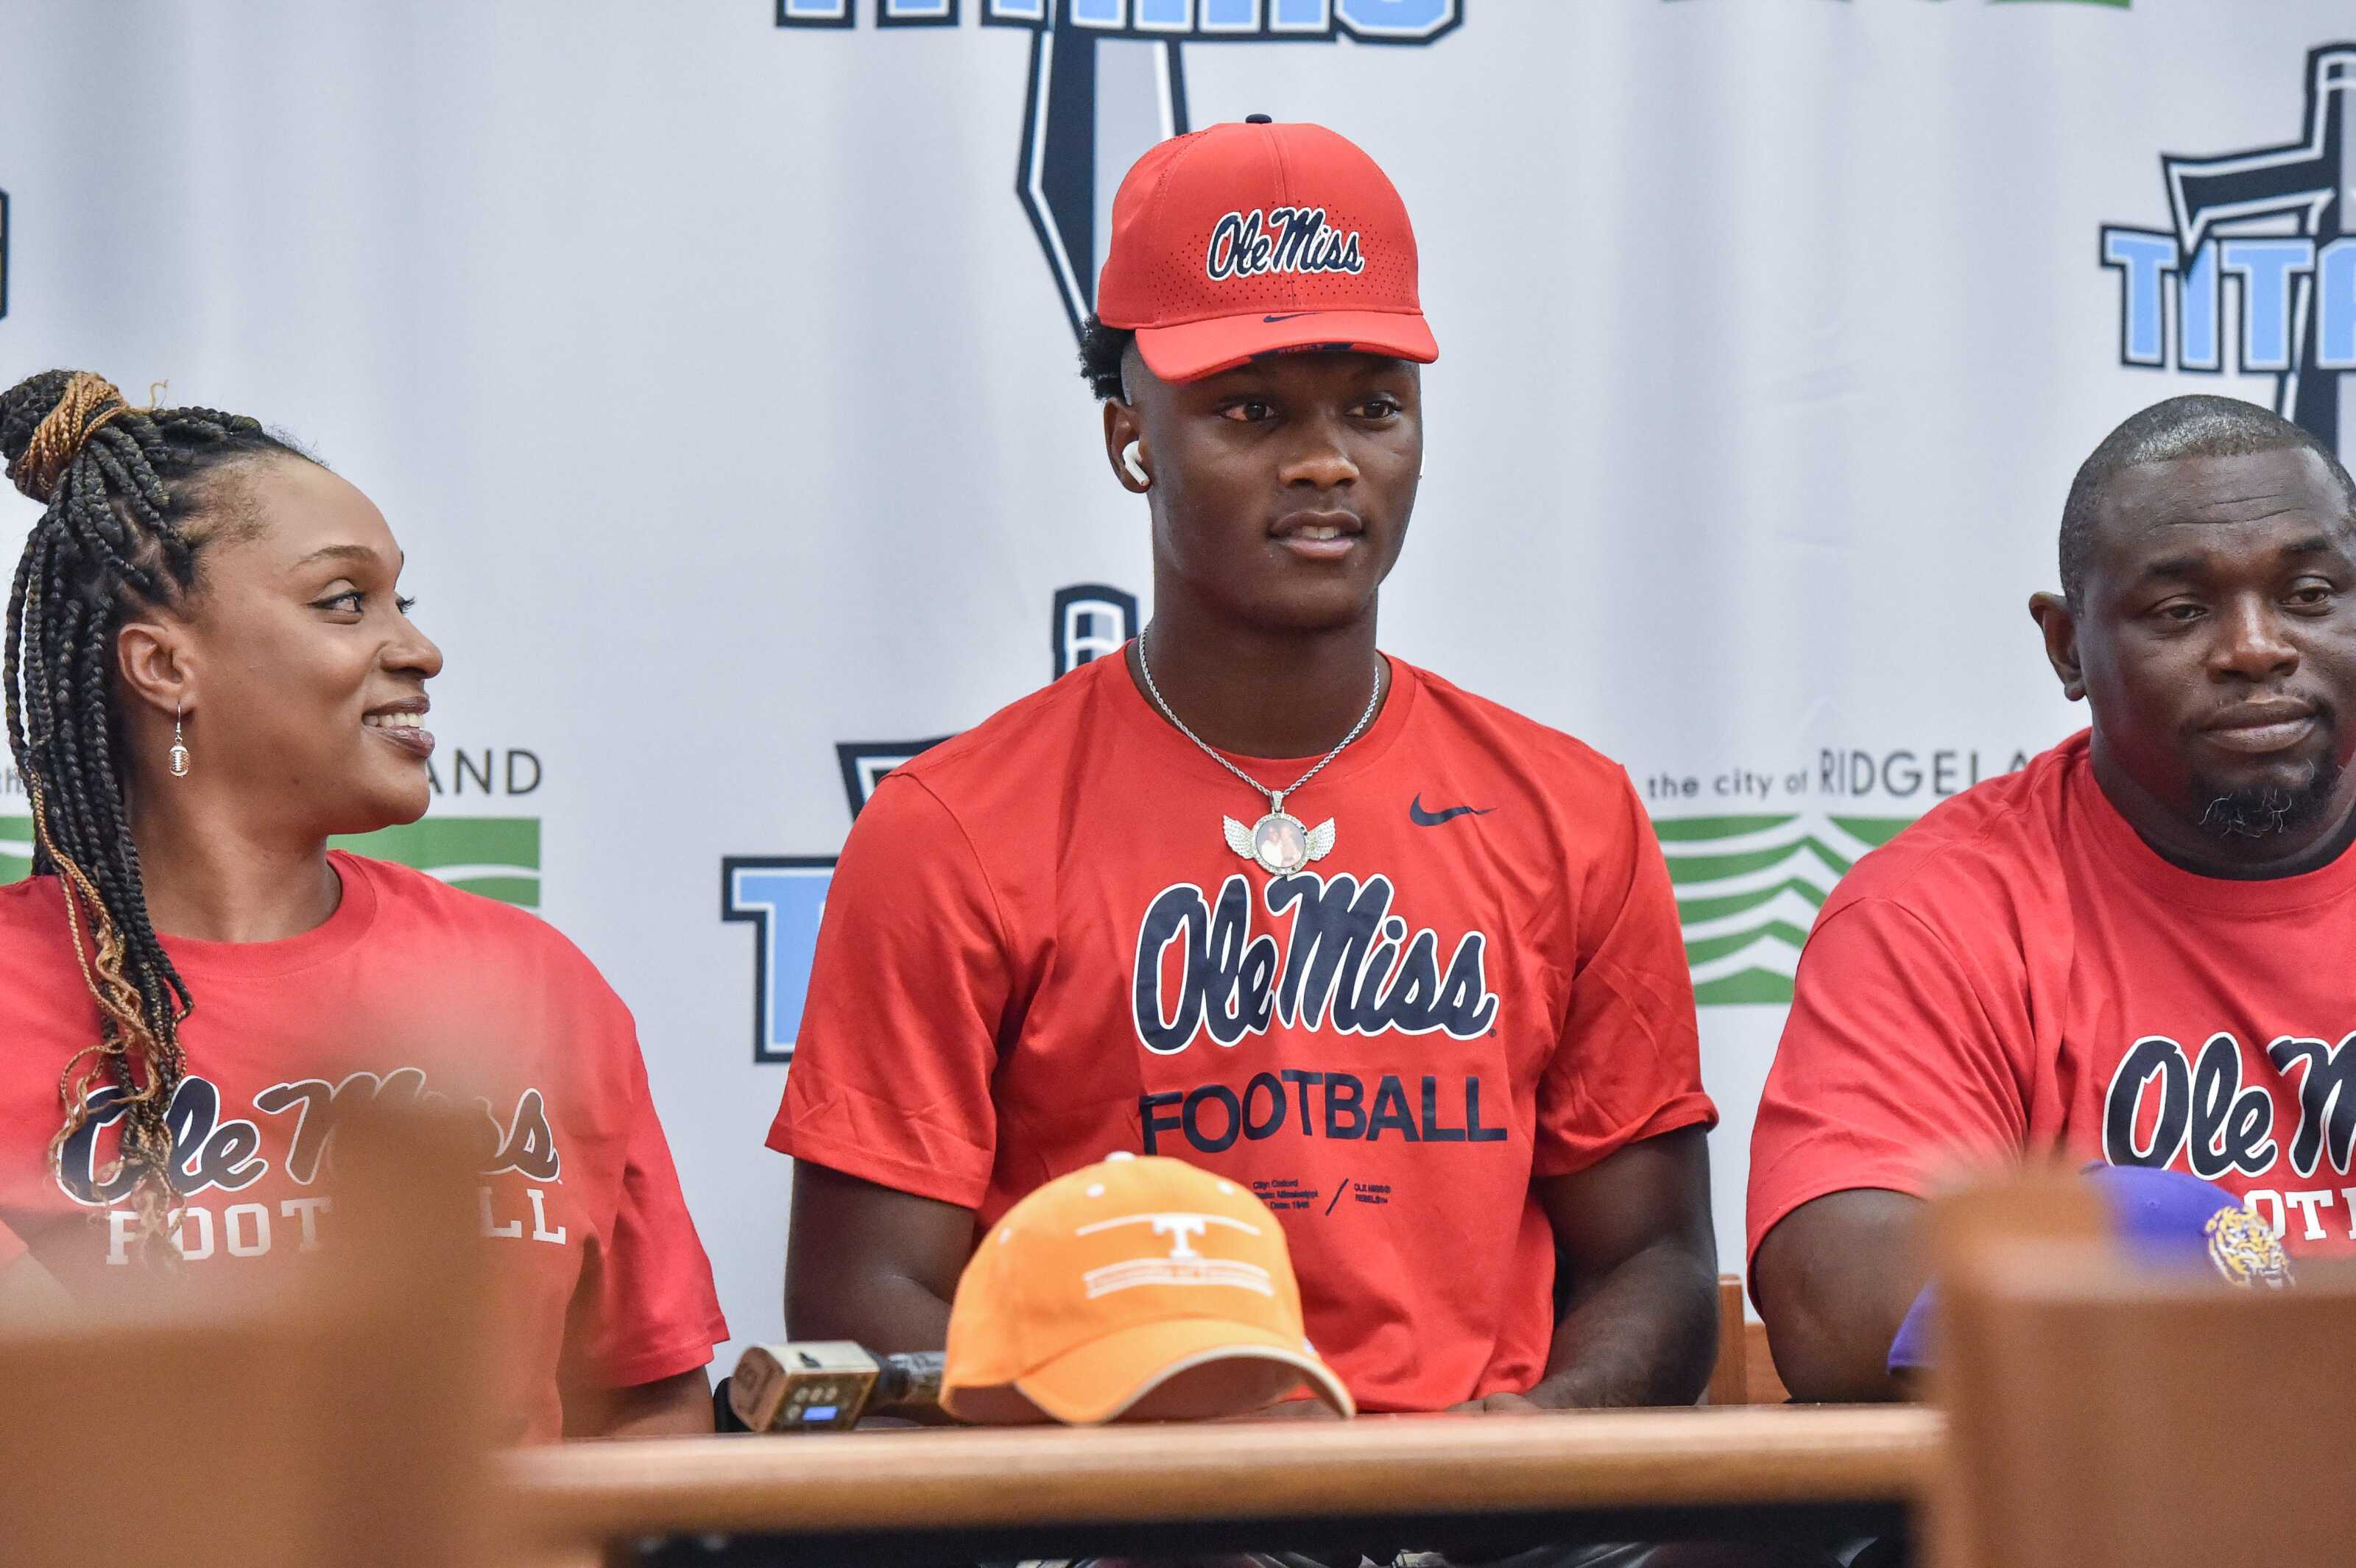 Ole Miss Football: Five Red-shirt Freshmen We Are Ready To See Play